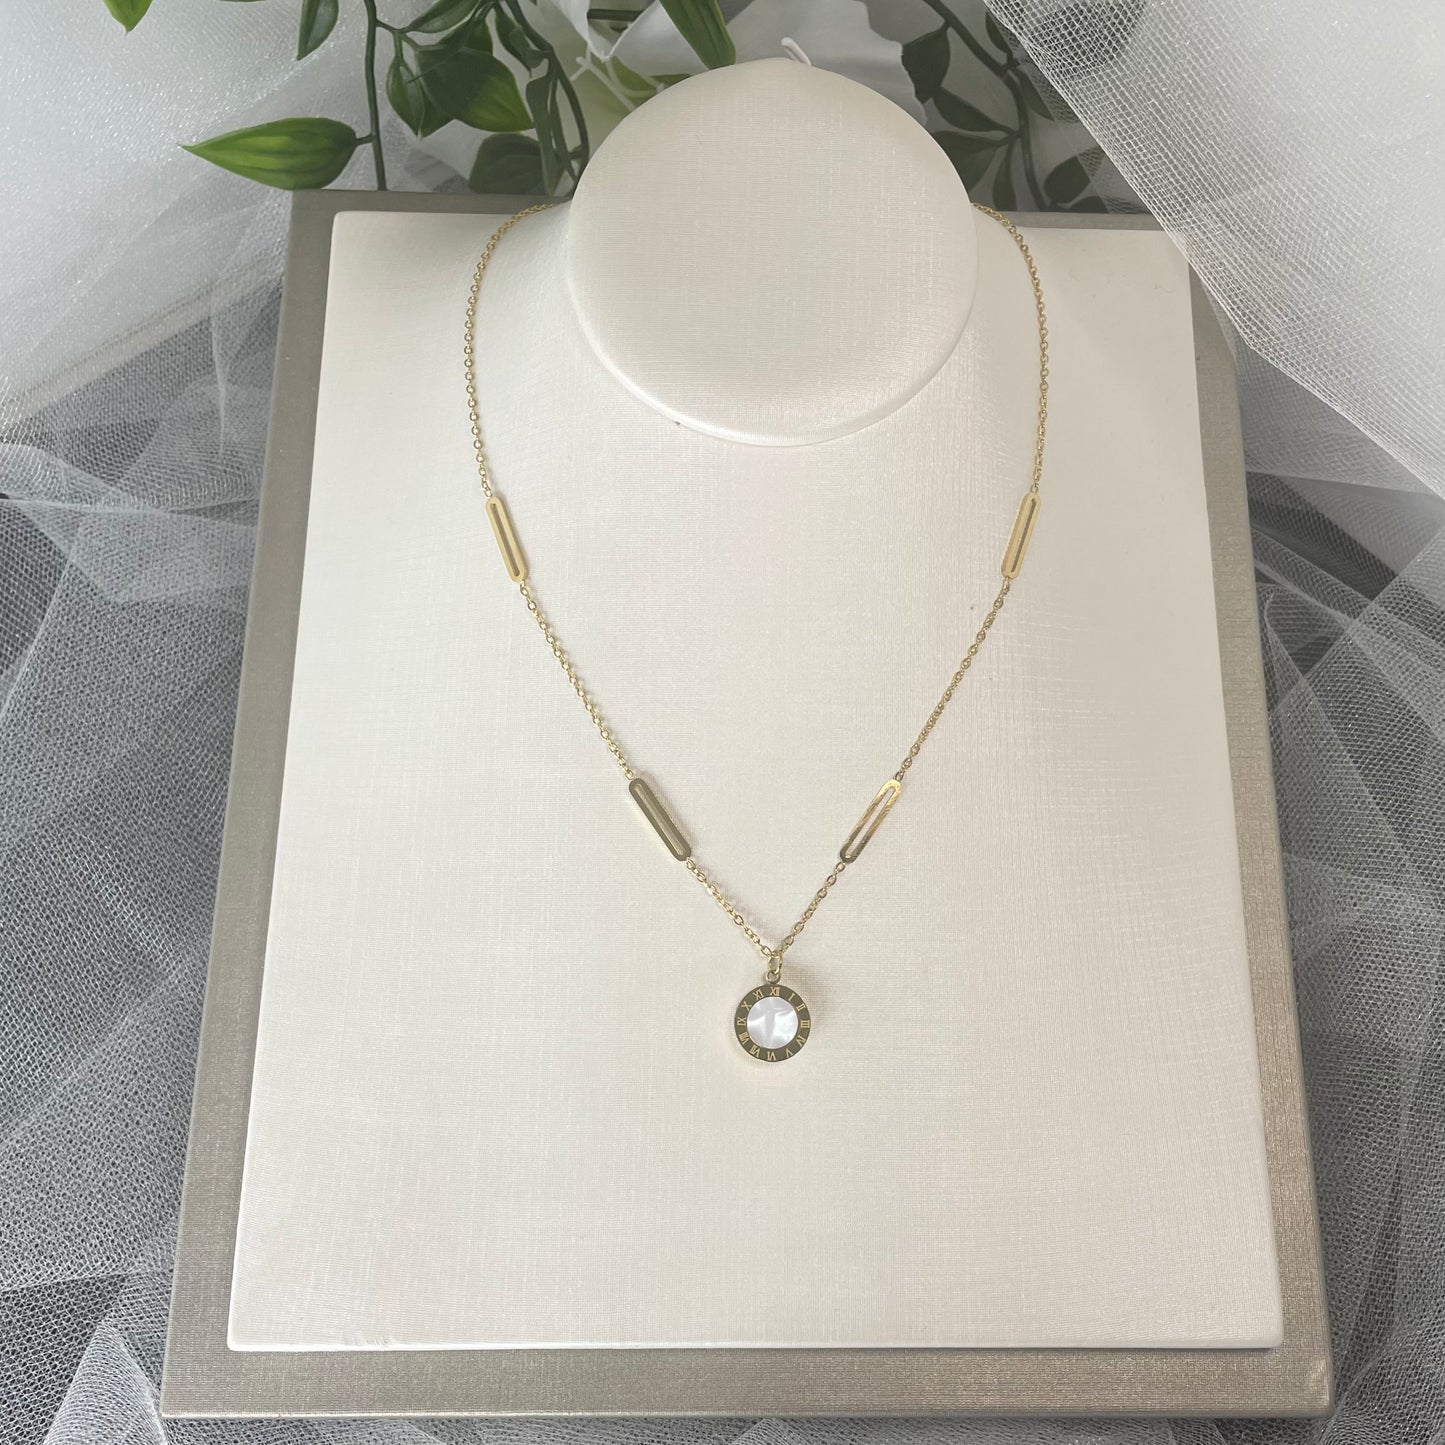 Adorn bridal necklace with reversible black & white Roman digital wafer pendant, gold accents, and stainless steel chain.